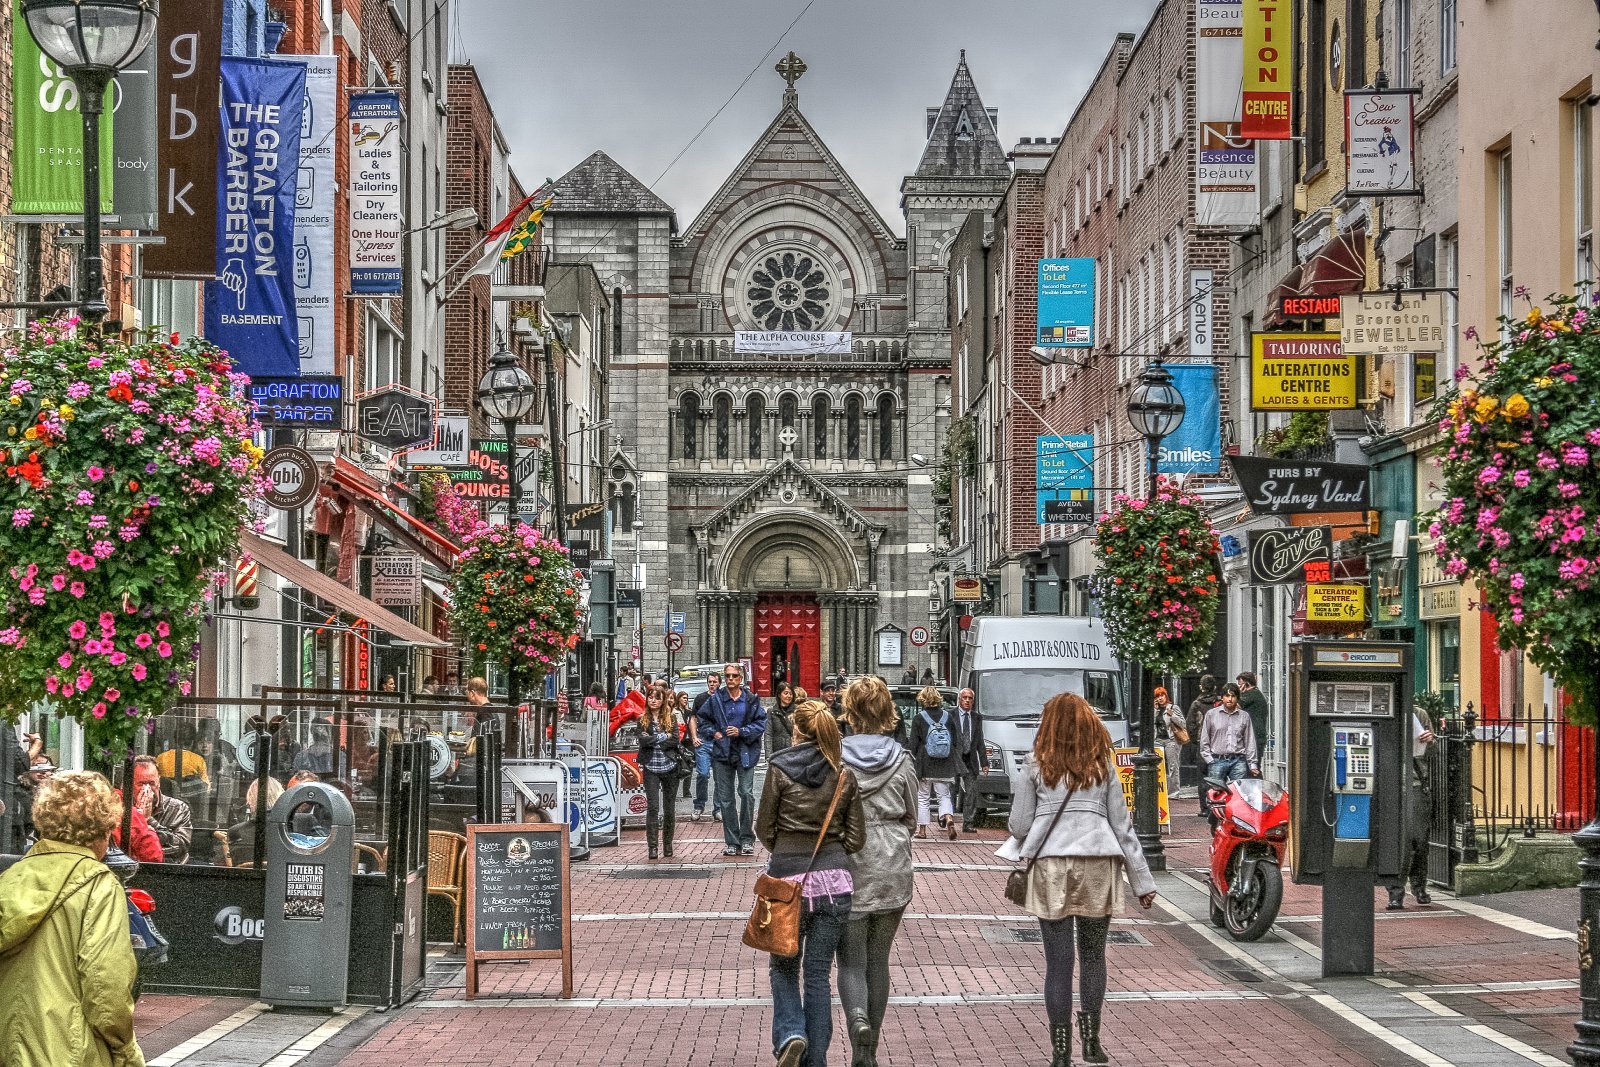 <p class="wp-caption-text">Image Credit: Shutterstock / jamegaw</p>  <p>Experience the lively spirit of Dublin’s streets with its rich history and friendly locals. Performers can entertain crowds along Grafton Street or in the bustling Temple Bar district.</p>